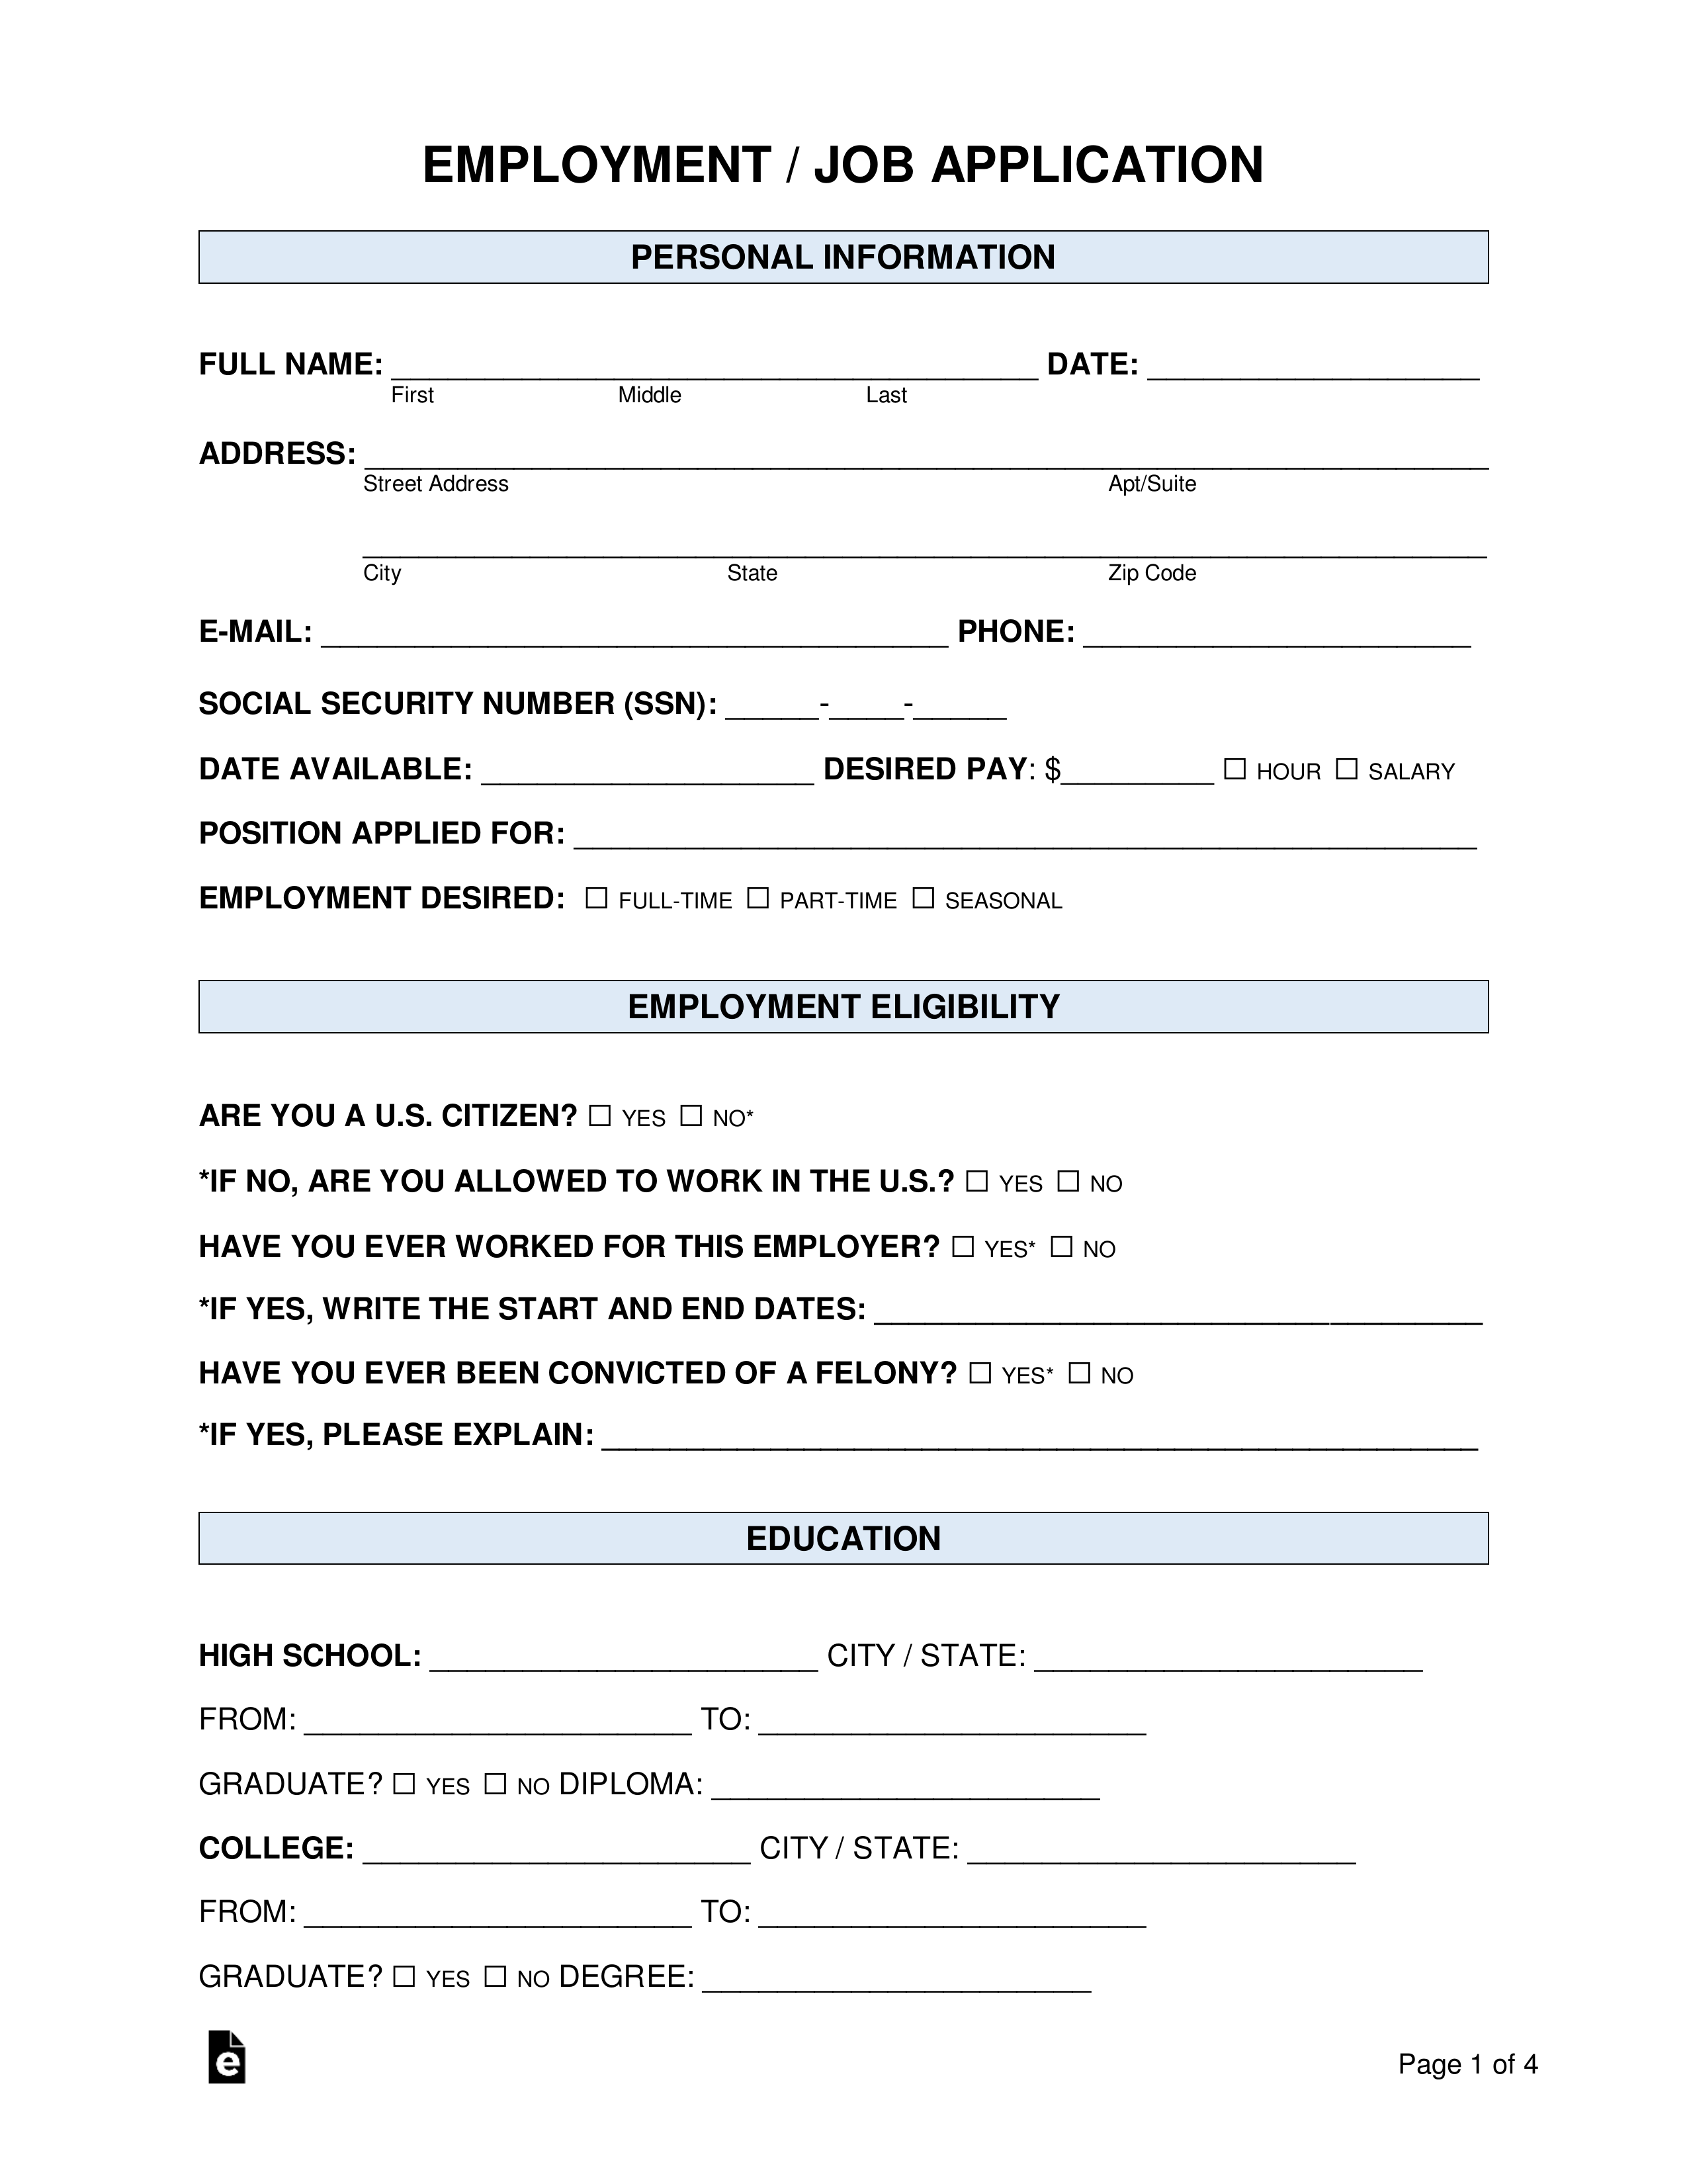 Free Job Application Form - Standard Template - Word  PDF – eForms With Regard To Employment Application Template Microsoft Word